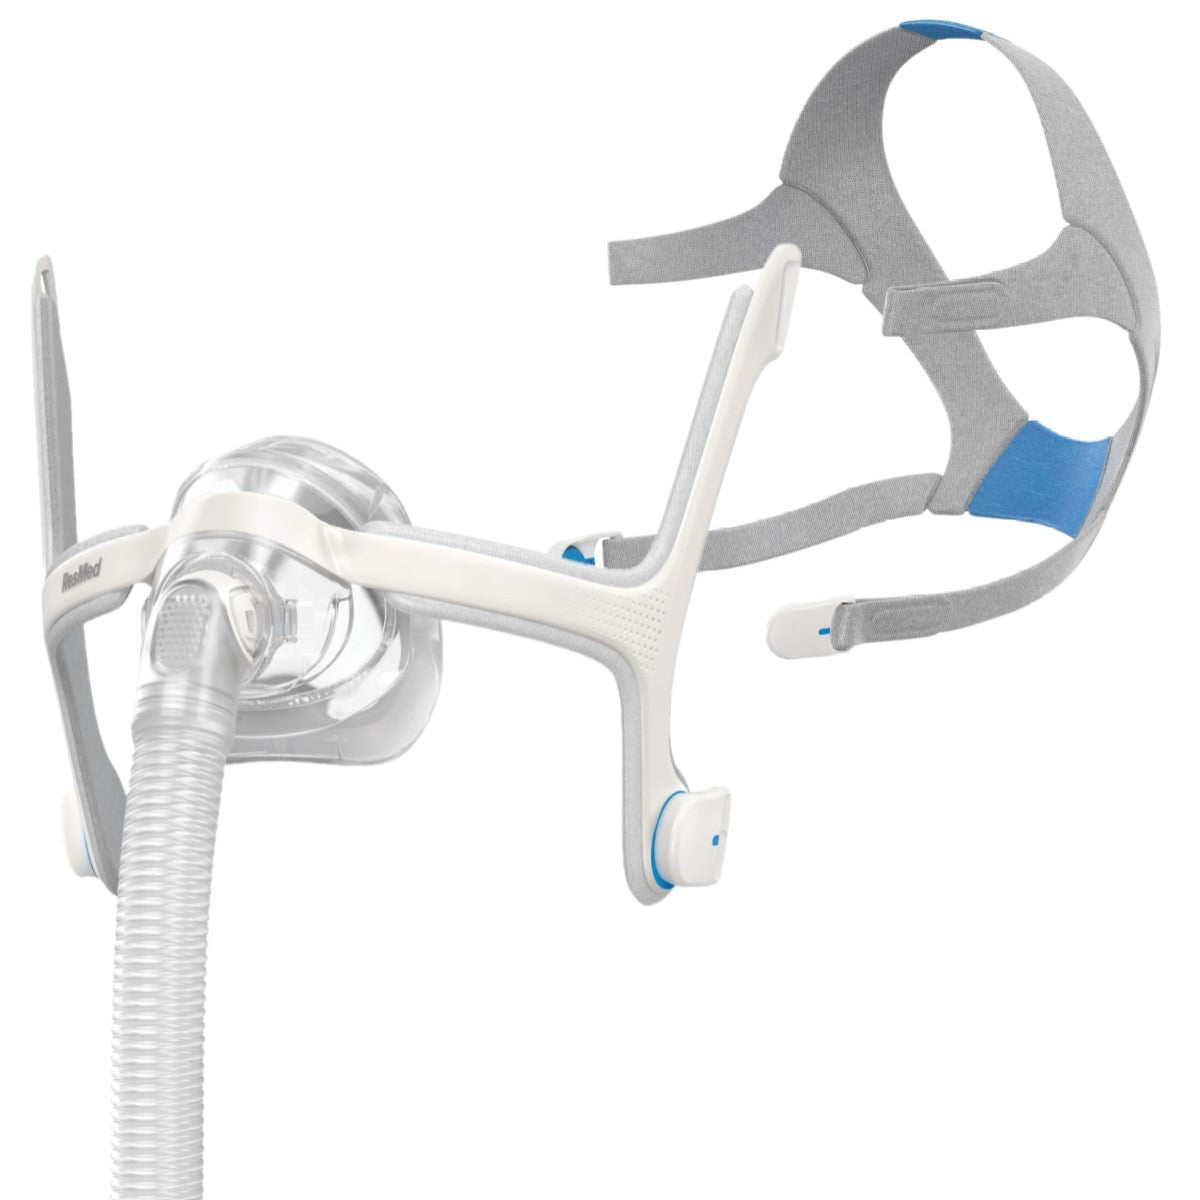 Parts of the Resmed N20 nasal mask